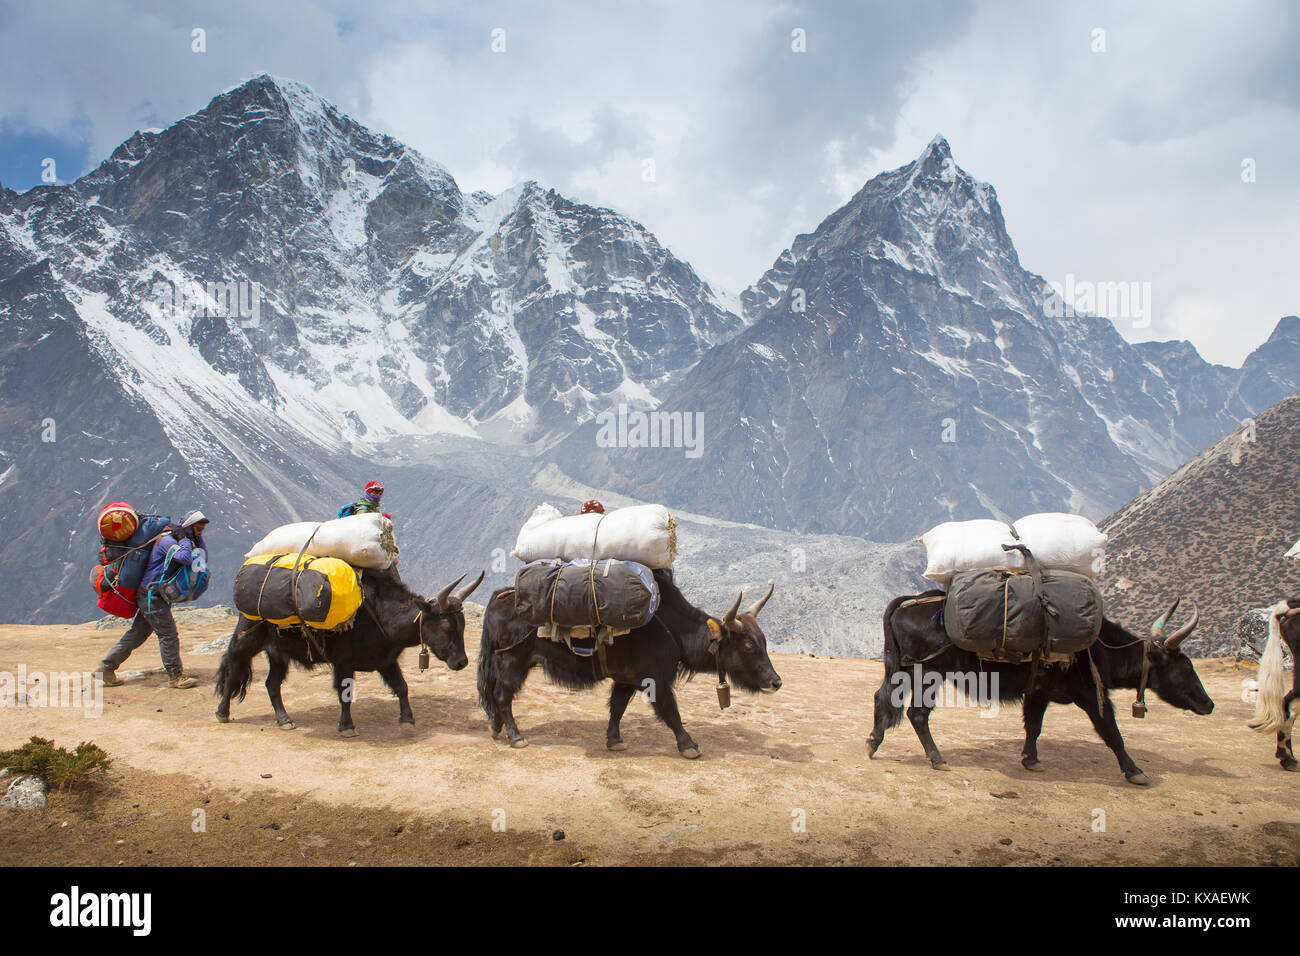 A caravan of yaks carrying heavy loads on its way to Everest Base Camp.  In the evenings you will be rewarded with delicious Nepalese cuisine around the dining-room fire while sipping Sherpa tea and conversing with other like-minded travelers. Stock Photo